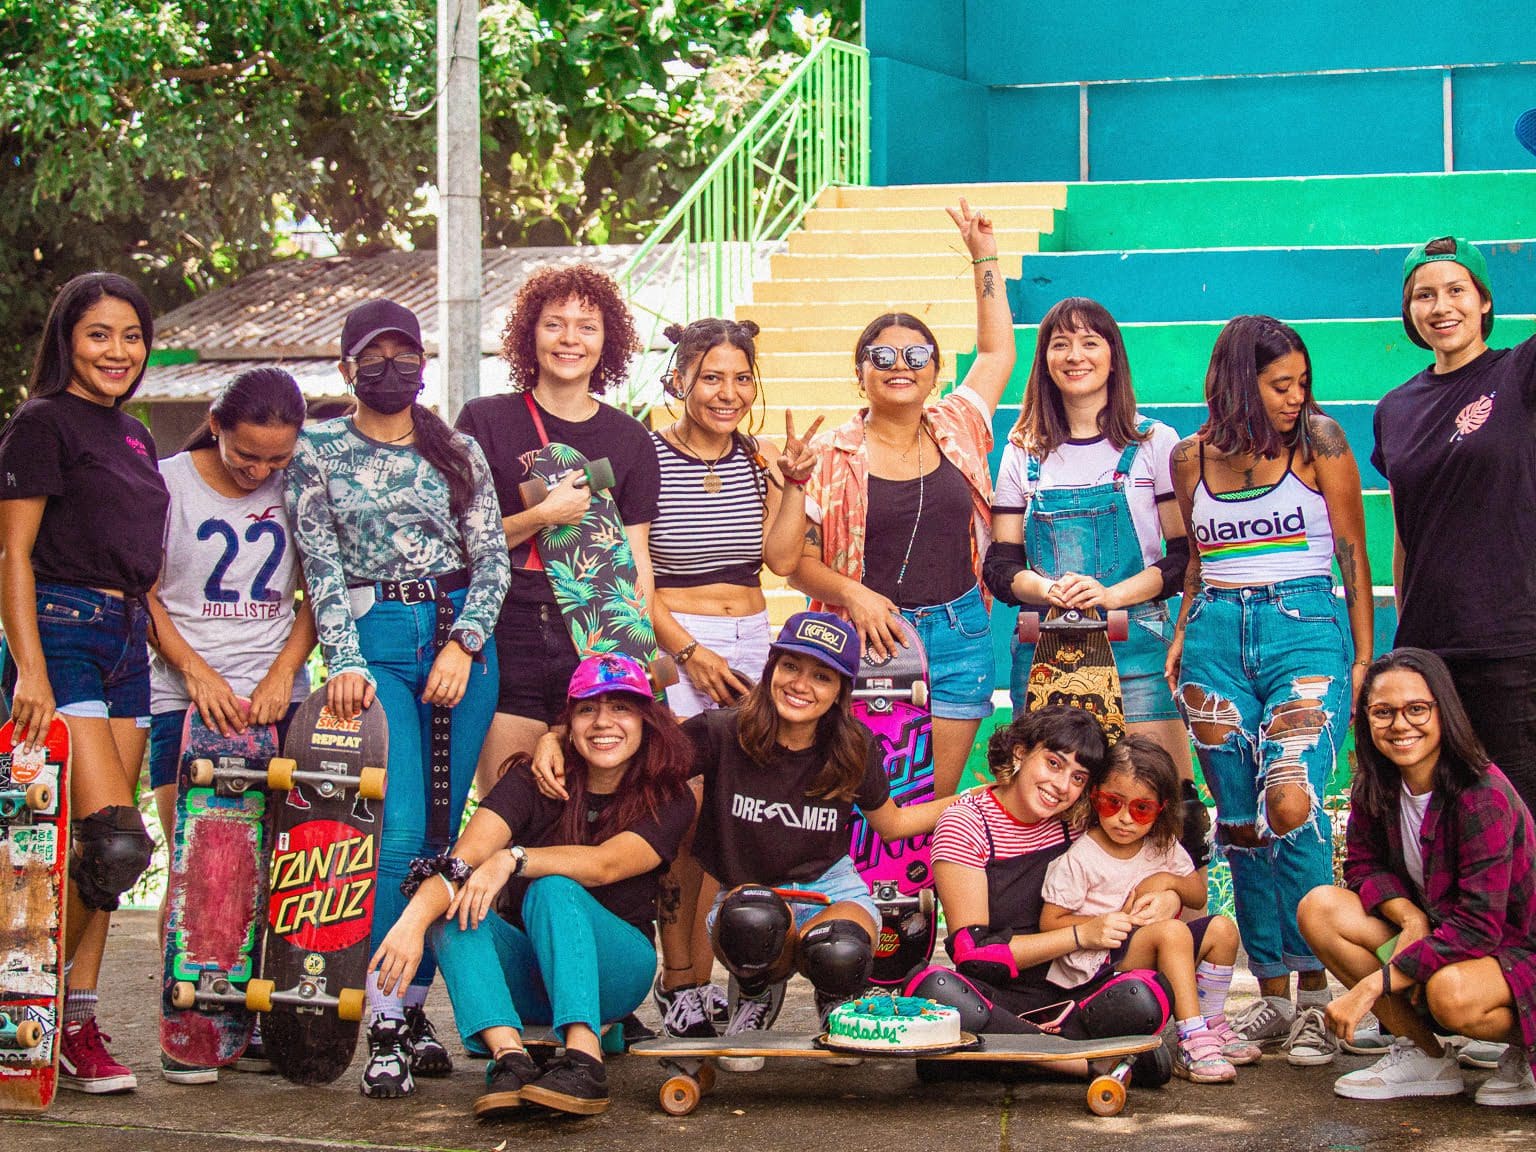 cross Waterfront Resume Female skateboarder fights sexism, empowers women through community - Orato